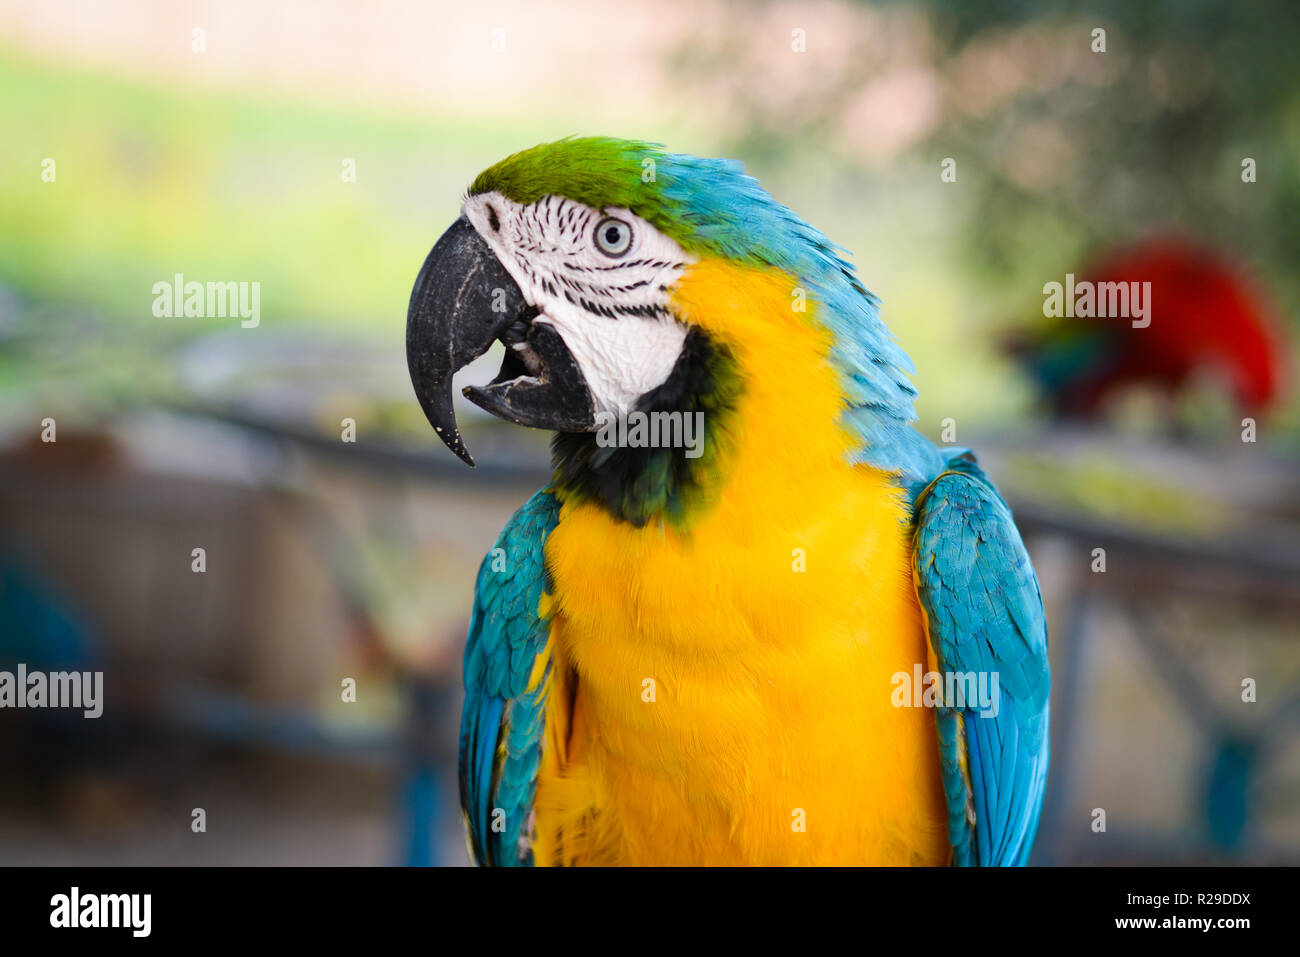 Beautiful portrait of a blue and yellow macaw bird Stock Photo